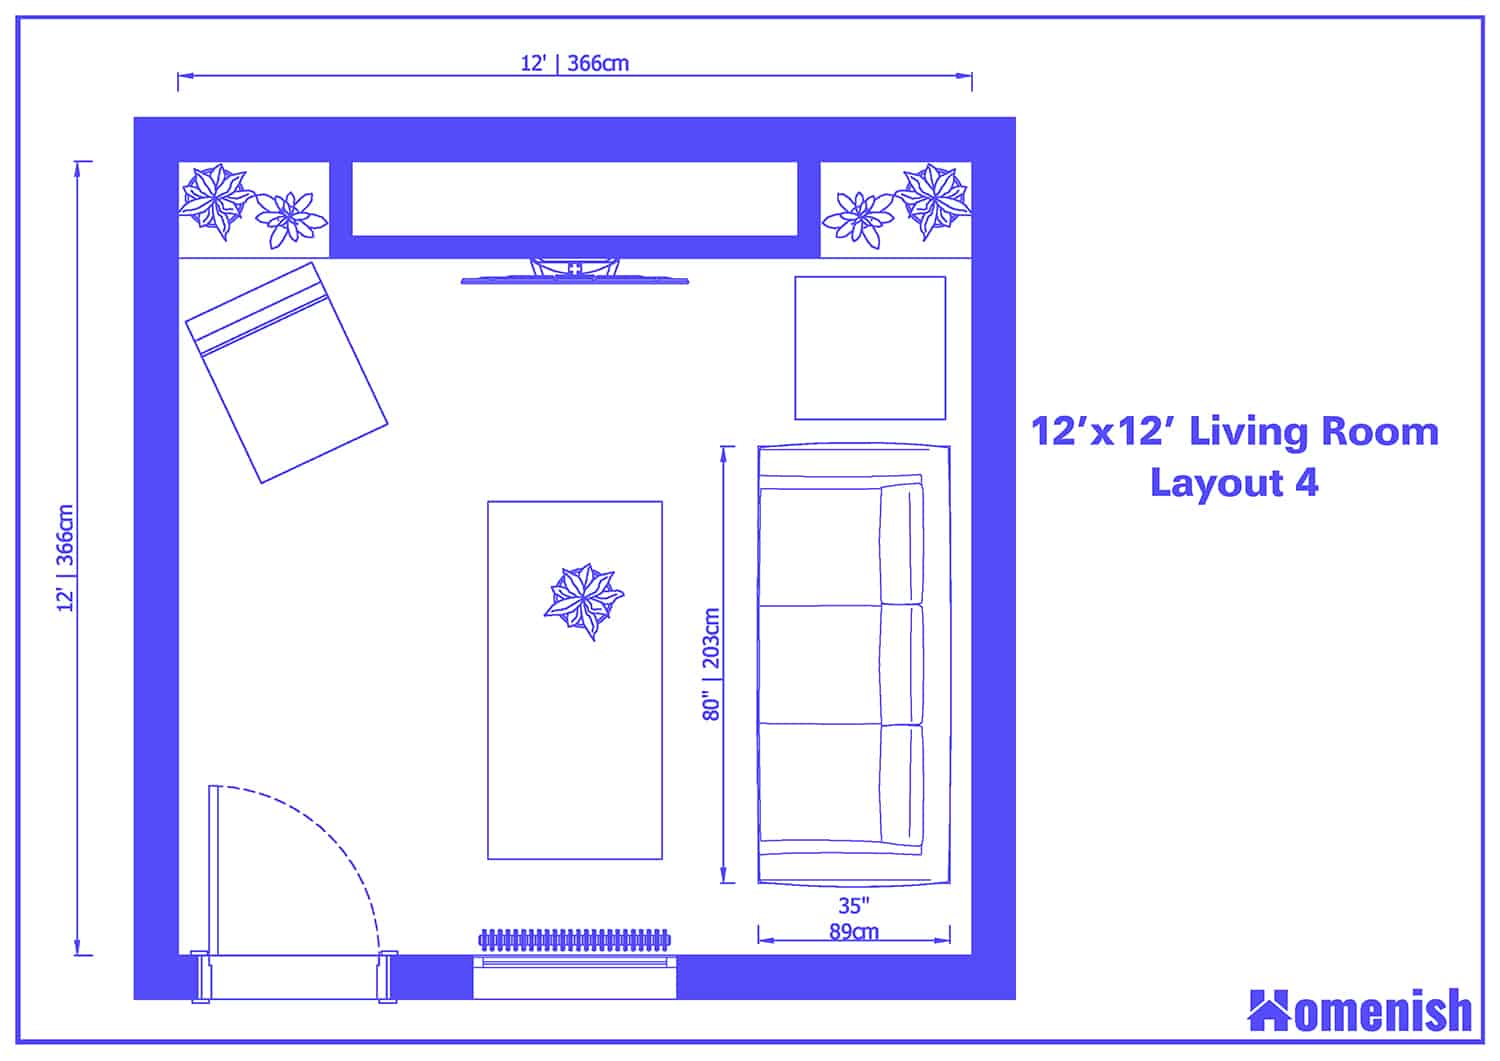 12' x 12' Living Room Layout 4